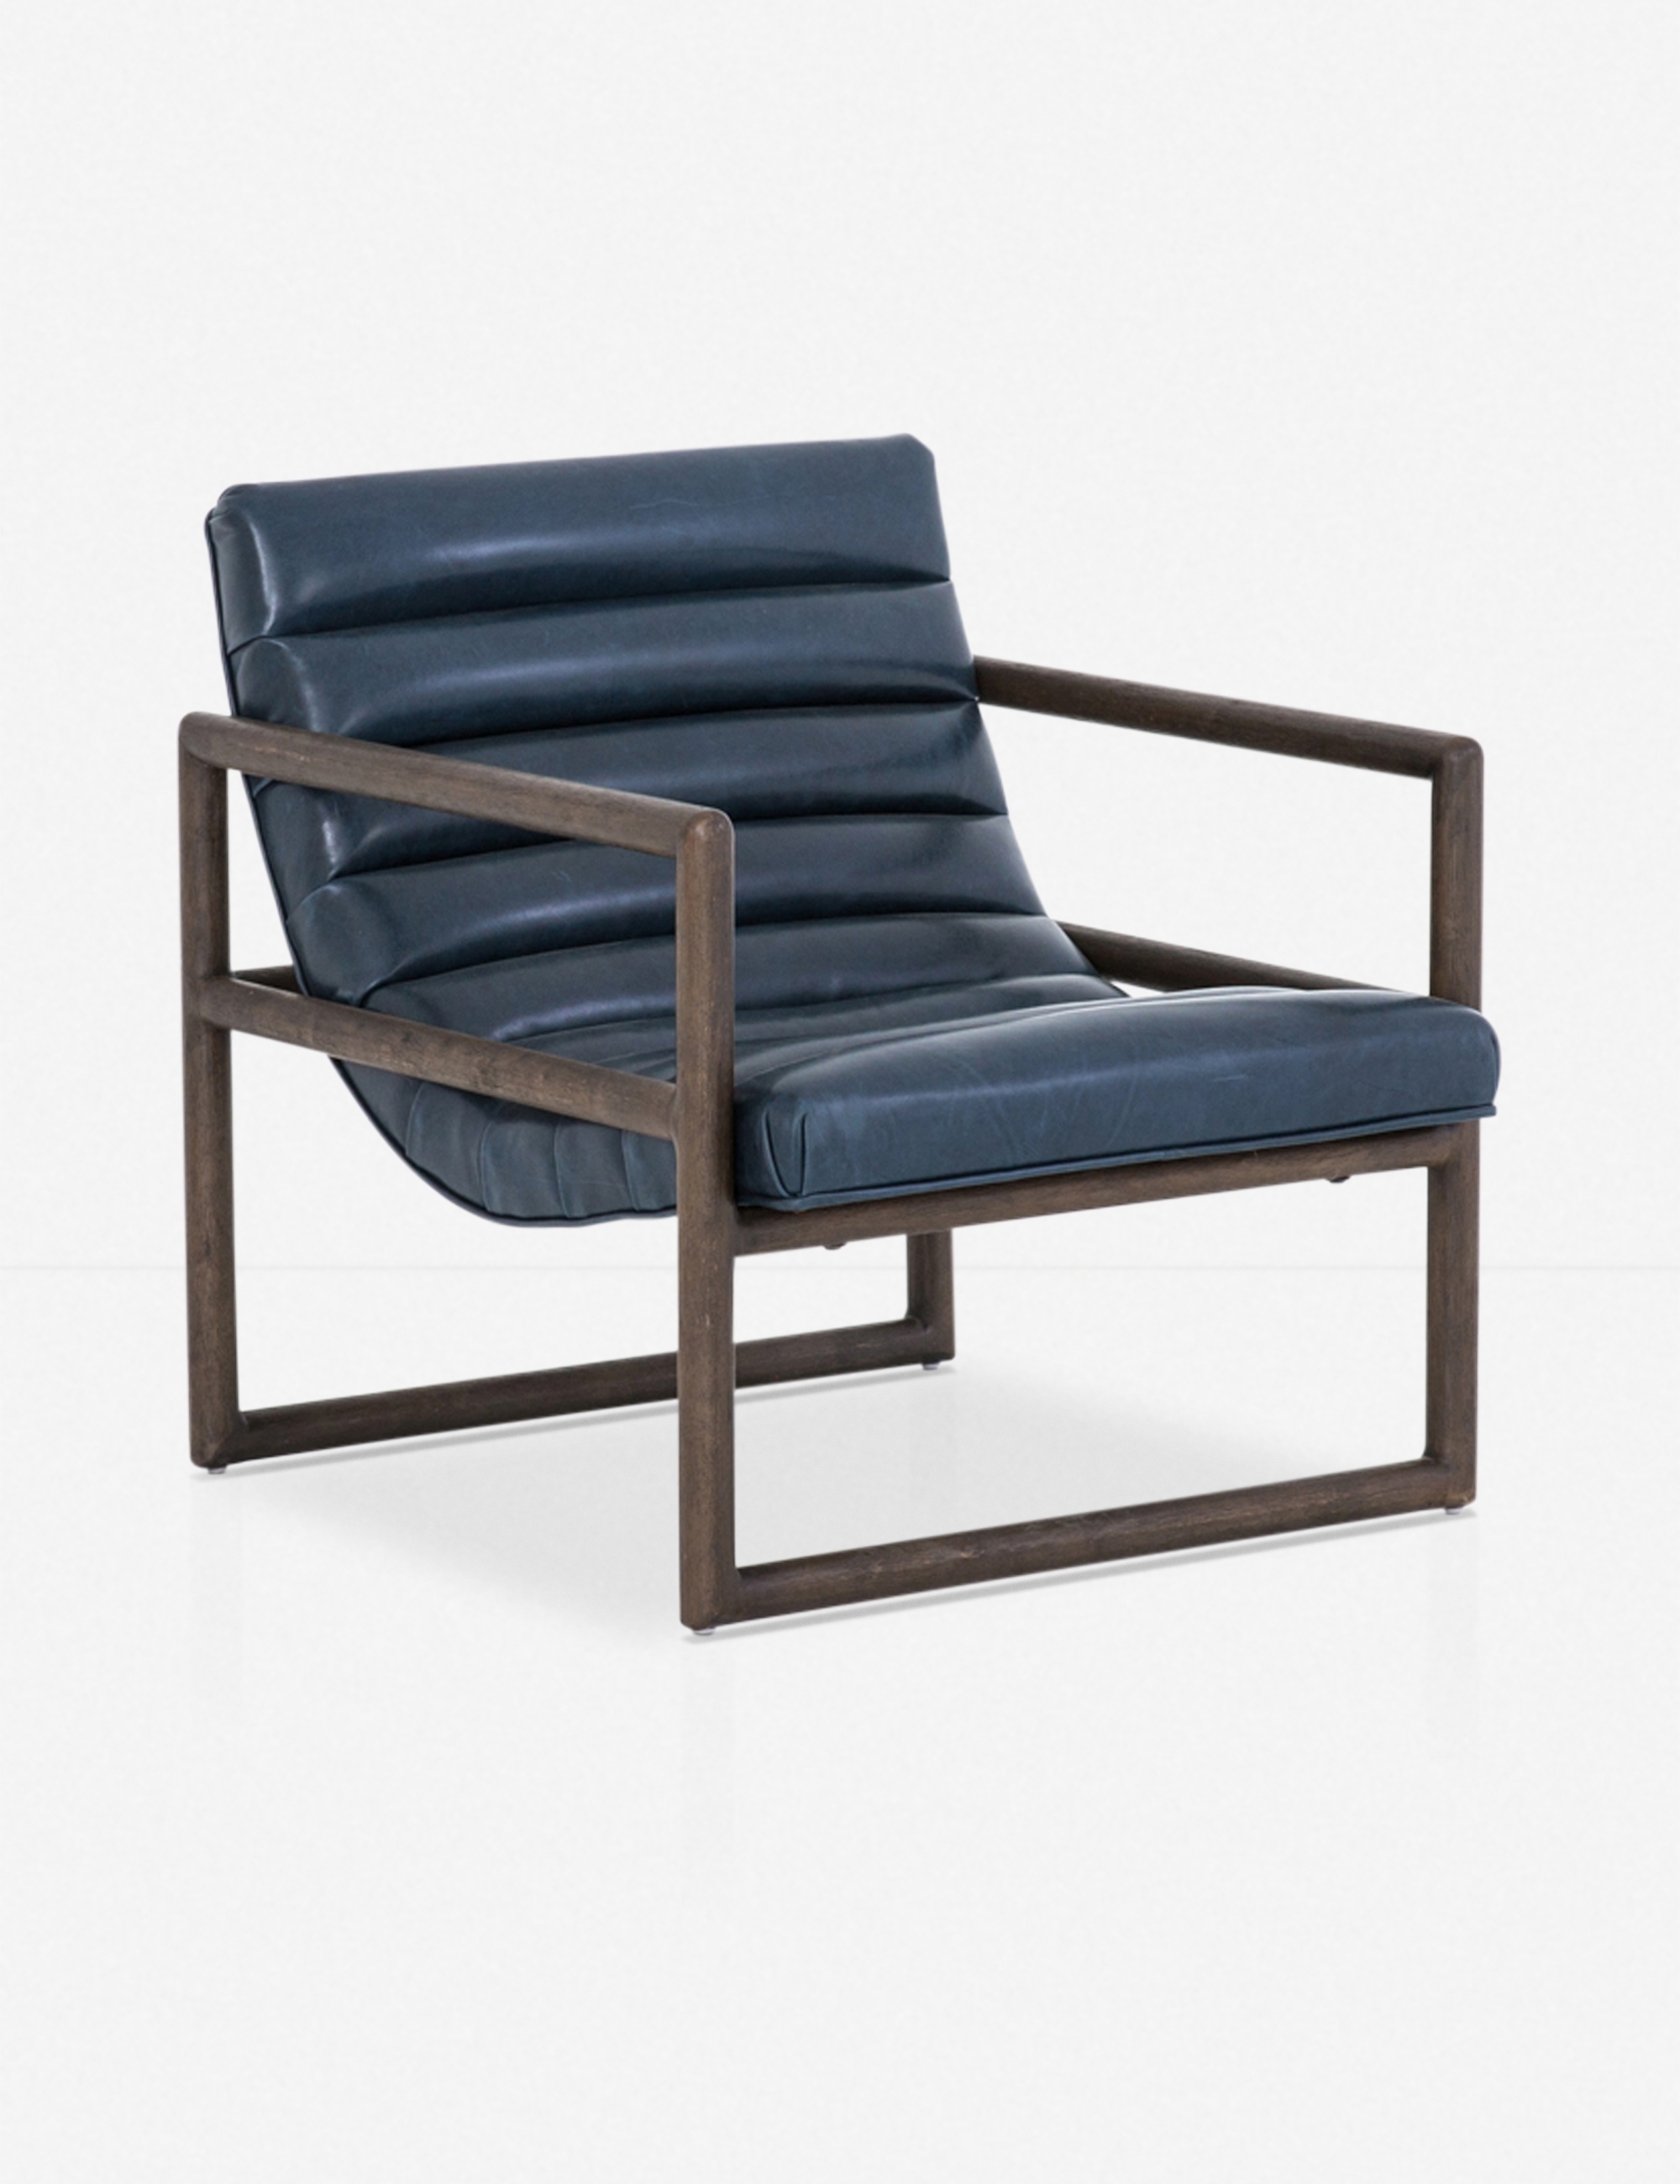 Huxley Leather Accent Chair - Image 3